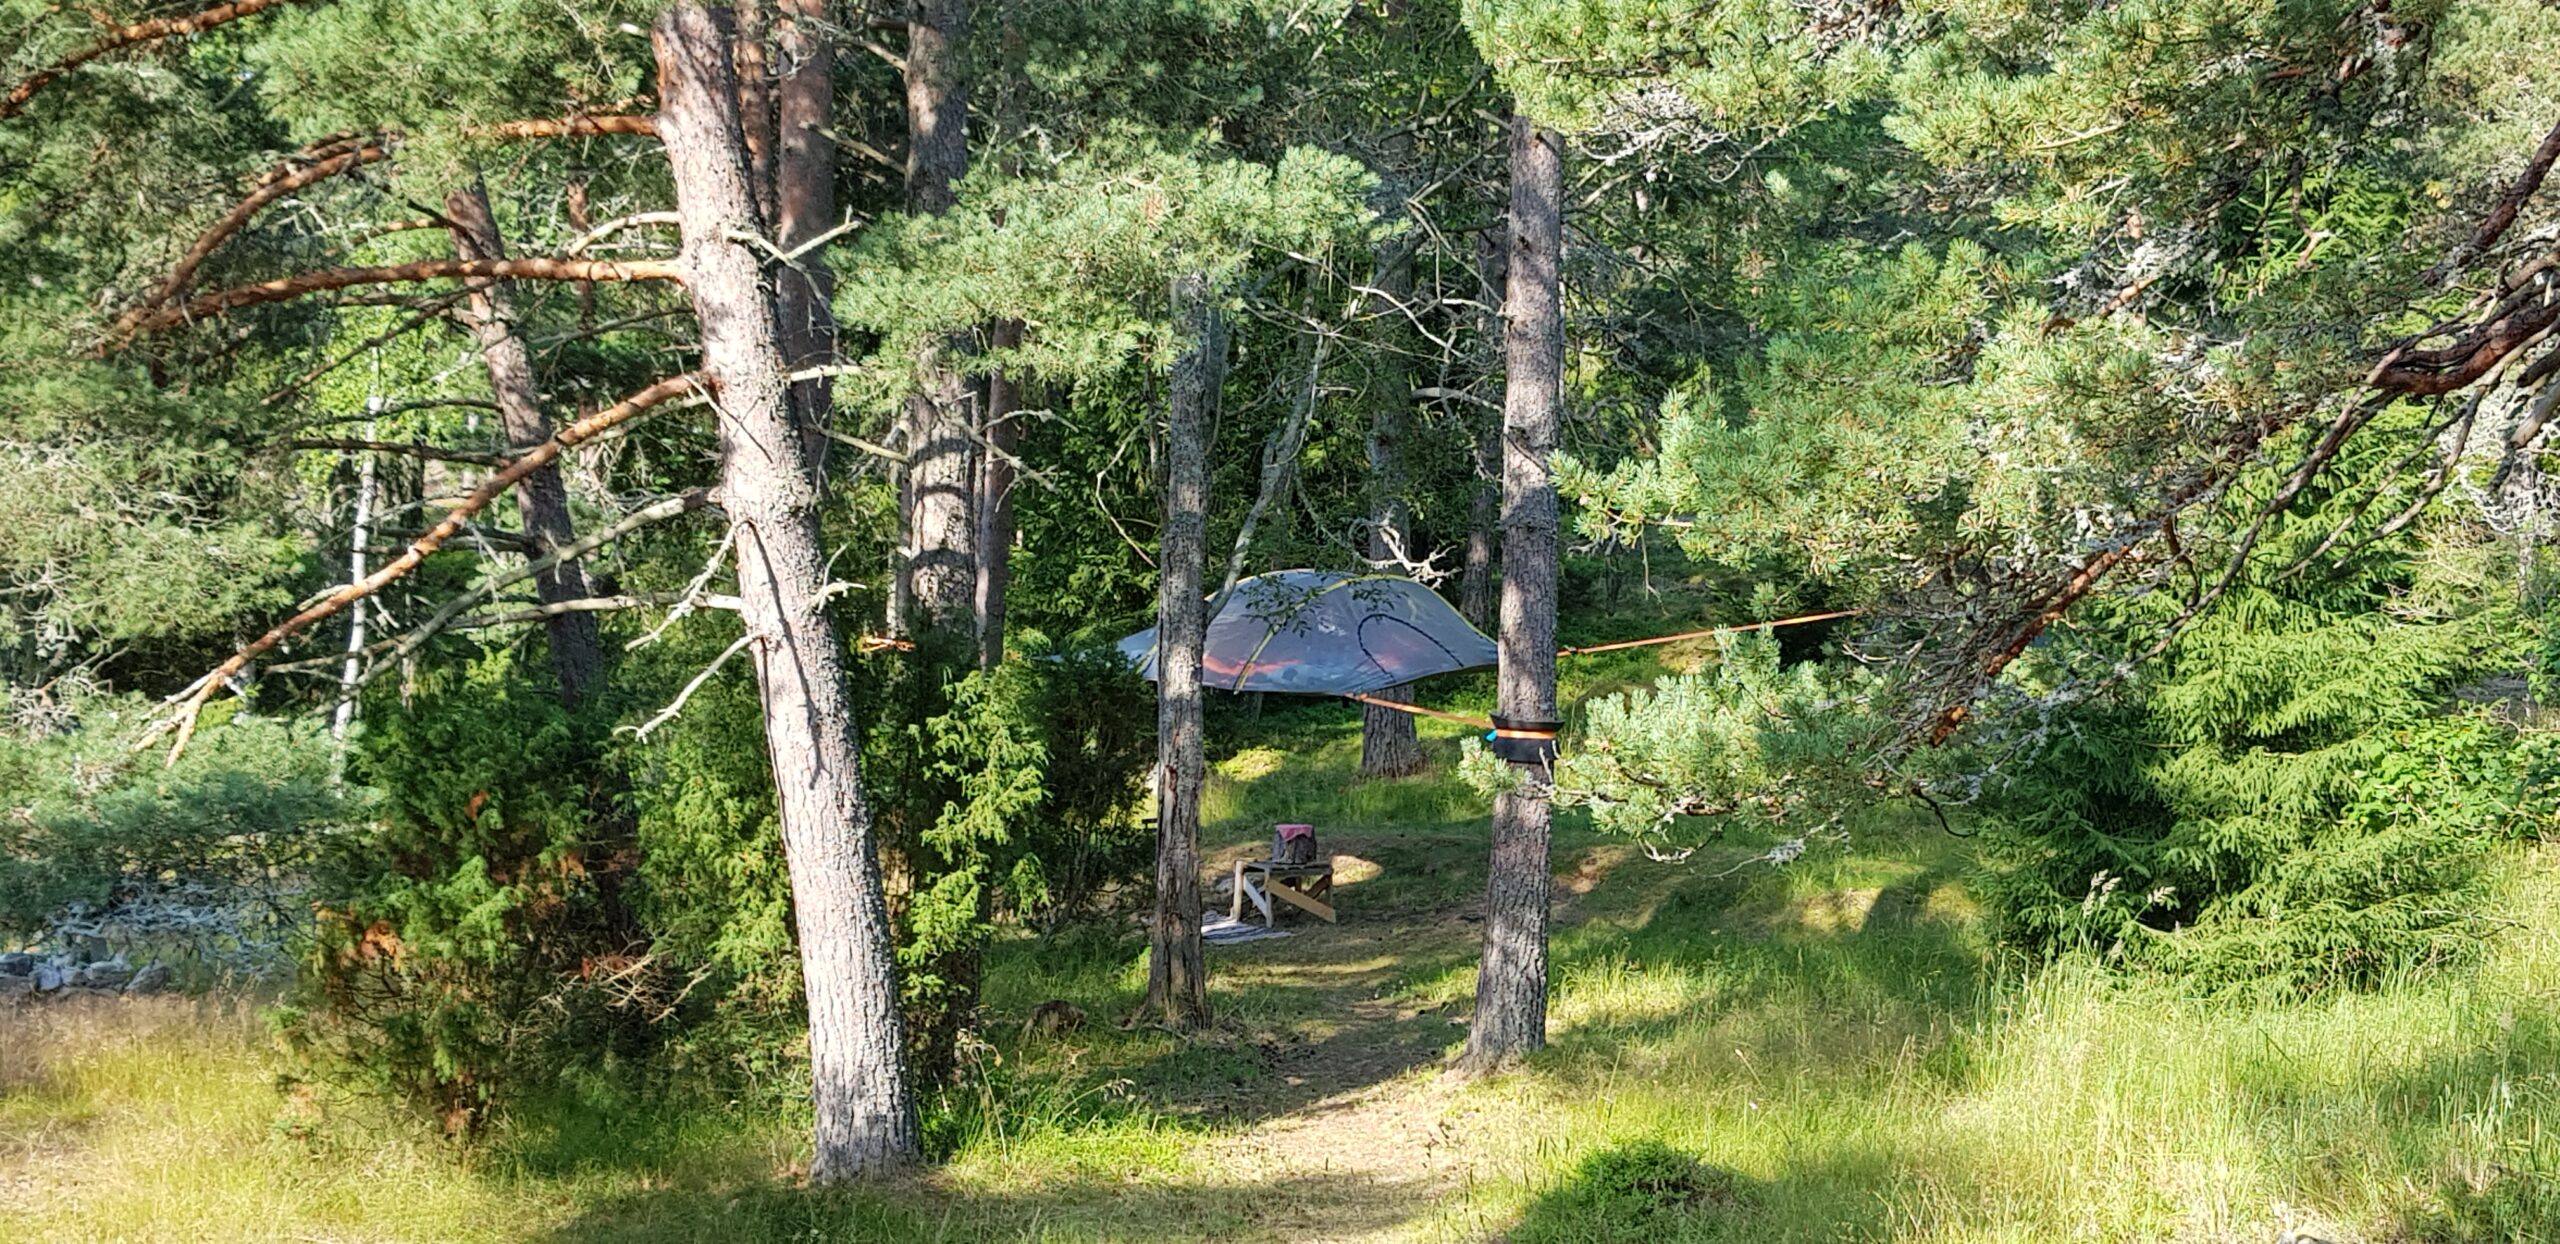 Tent hanging high up between the trees